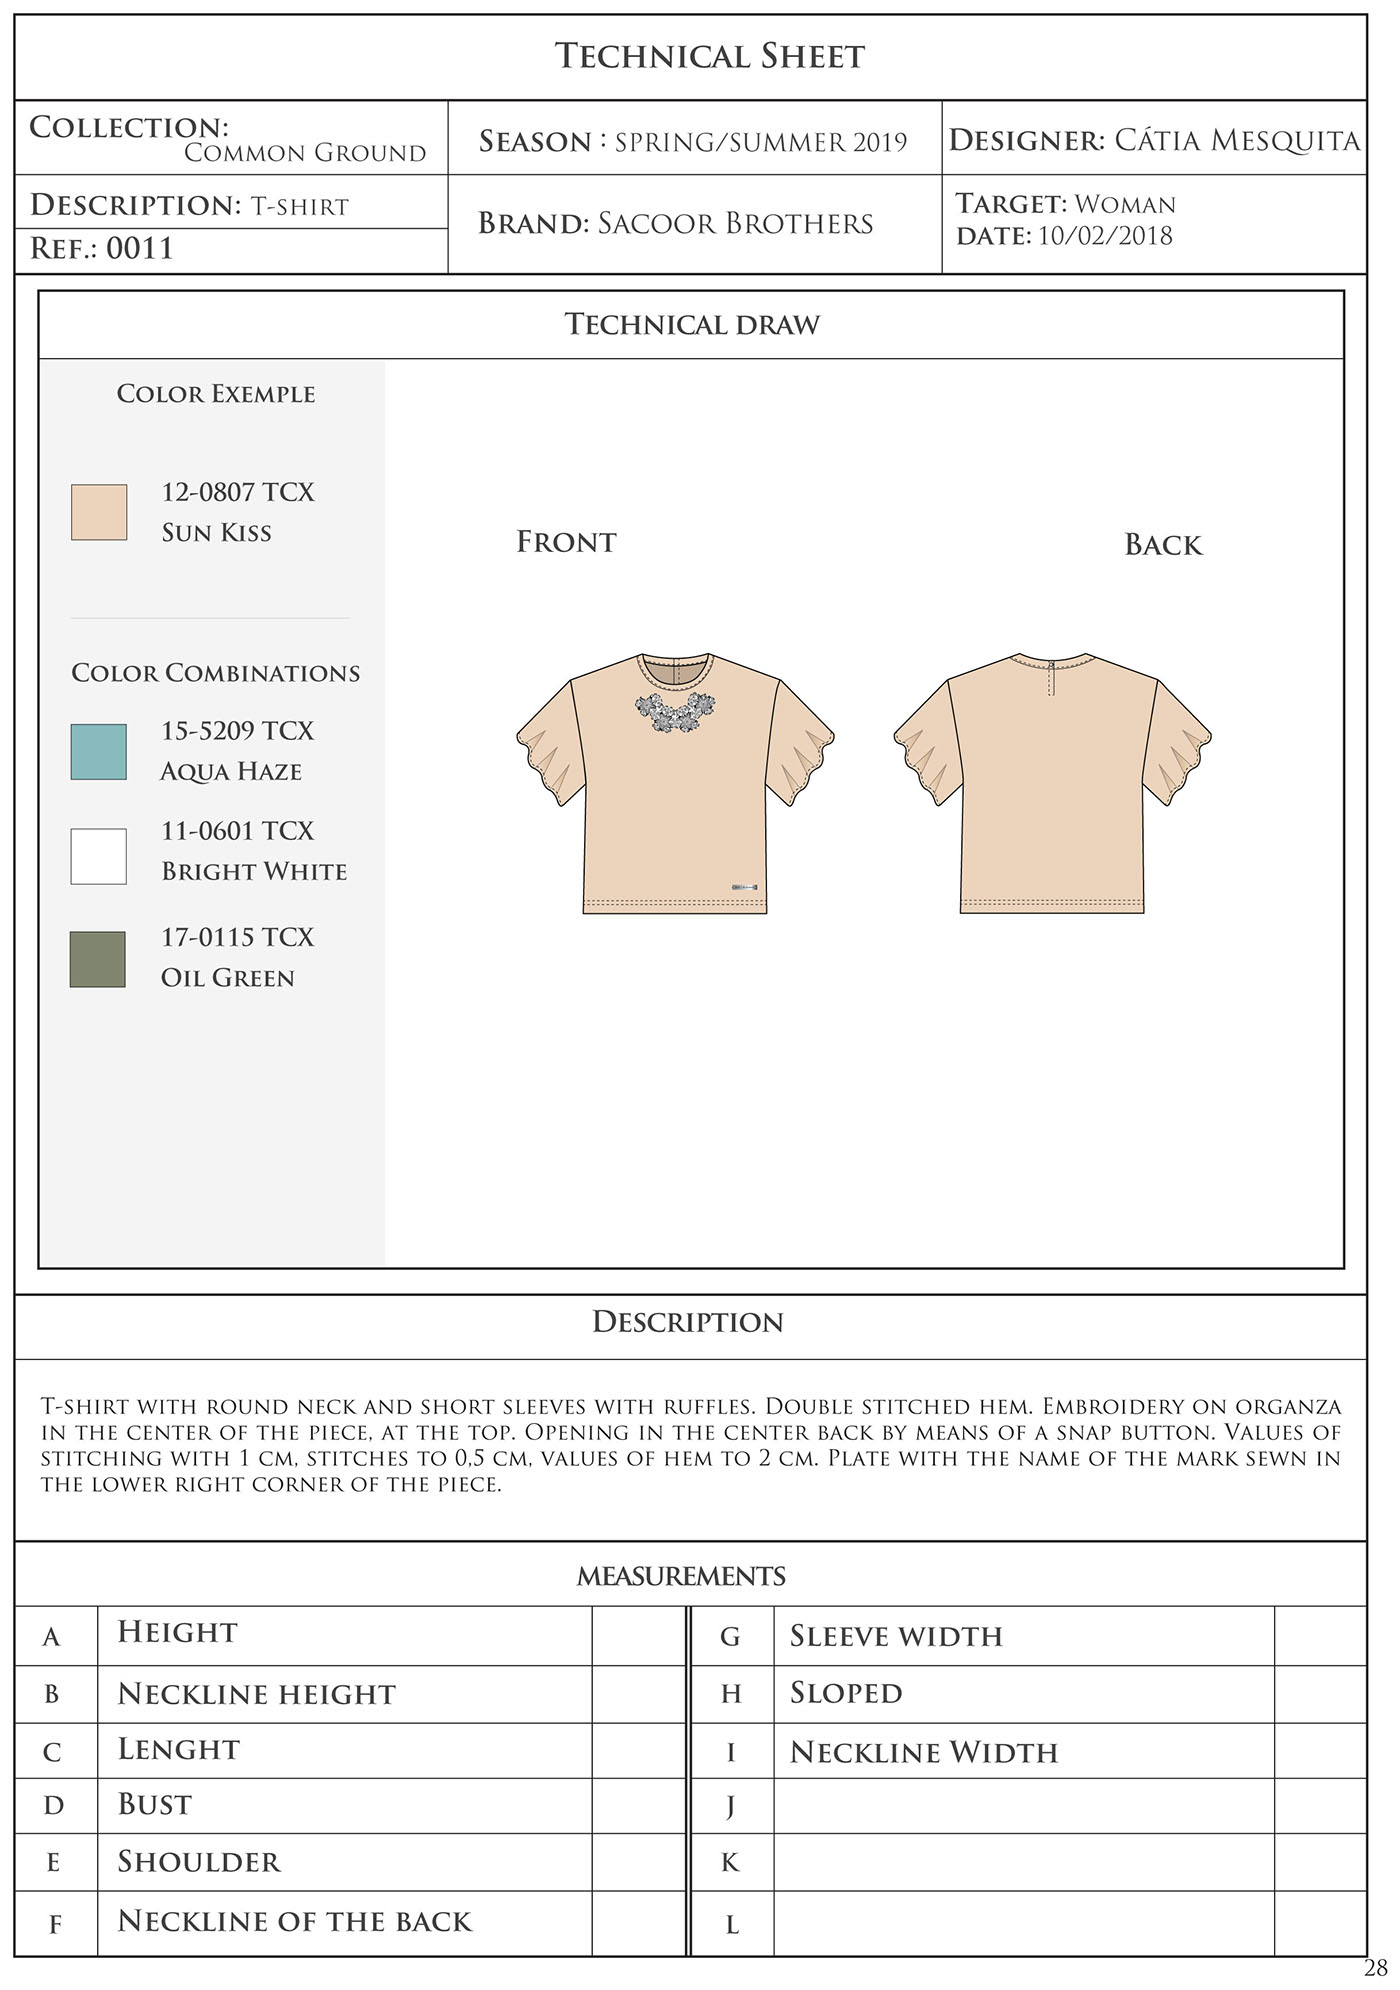 sacoor brothers fashion design spring/ summer women's collection Technical Sheet floral pattern